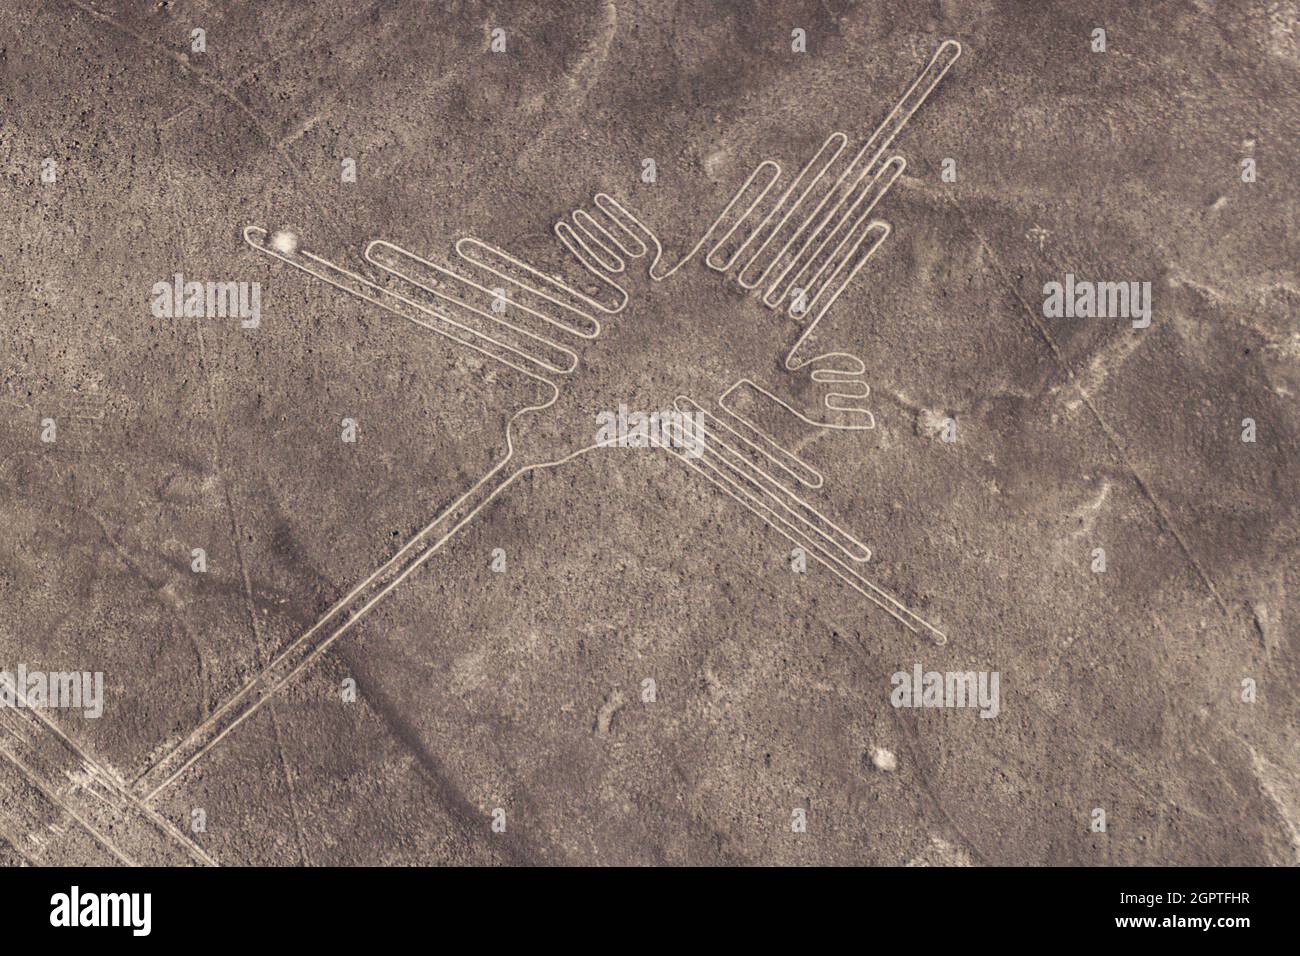 Aerial view of geoglyphs near Nazca - famous Nazca Lines, Peru. In the center, Hummingbird figure is present Stock Photo